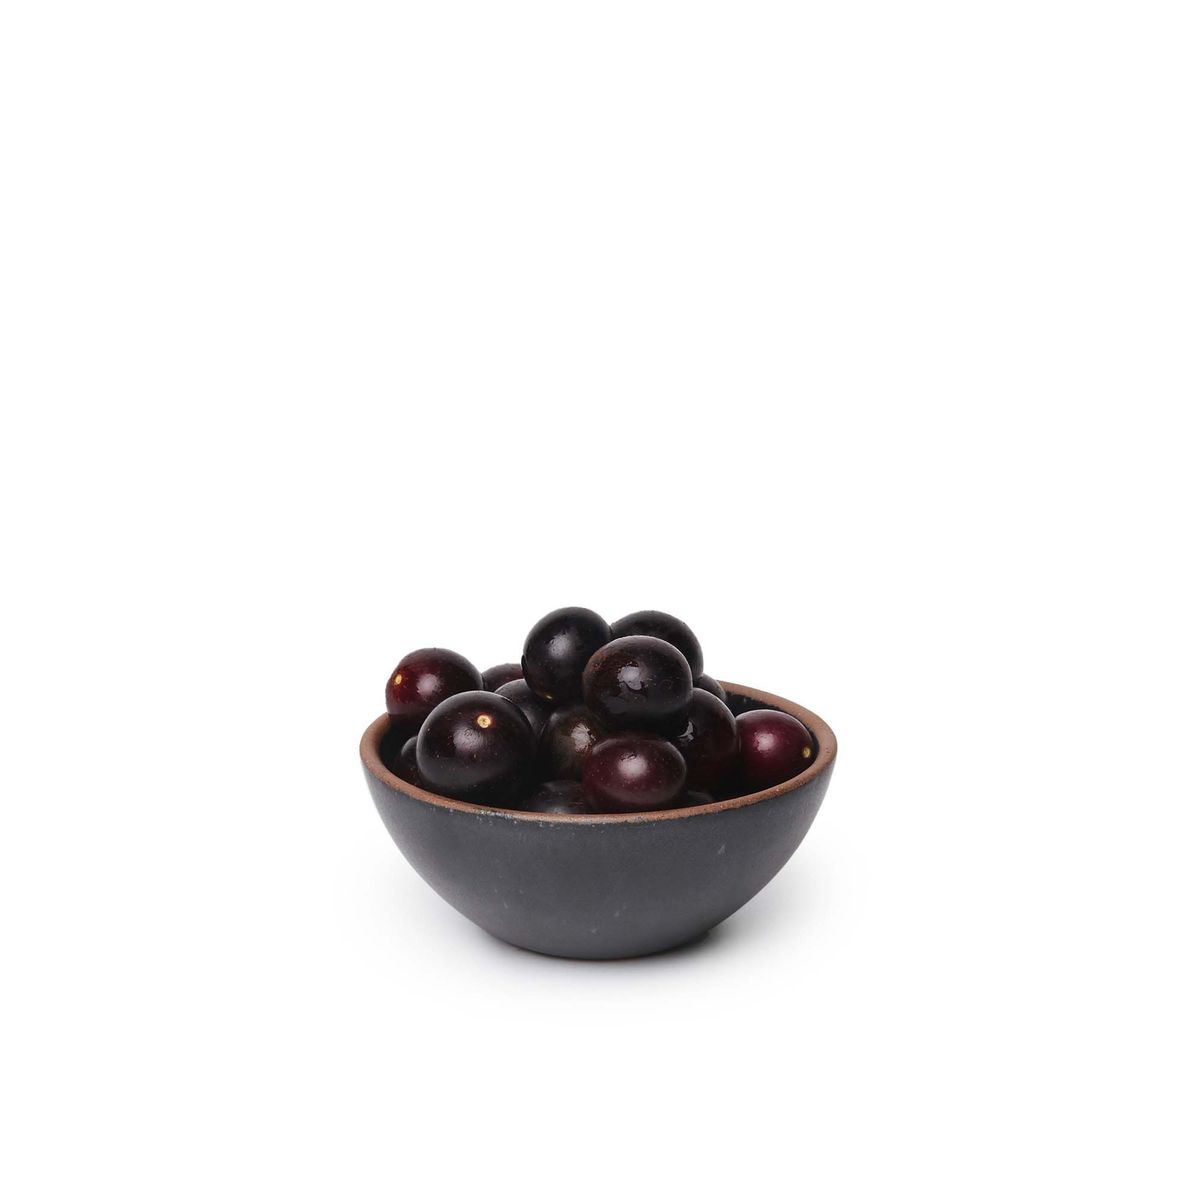 A small dessert sized rounded ceramic bowl in a graphite black color featuring iron speckles and an unglazed rim, filled with cherries